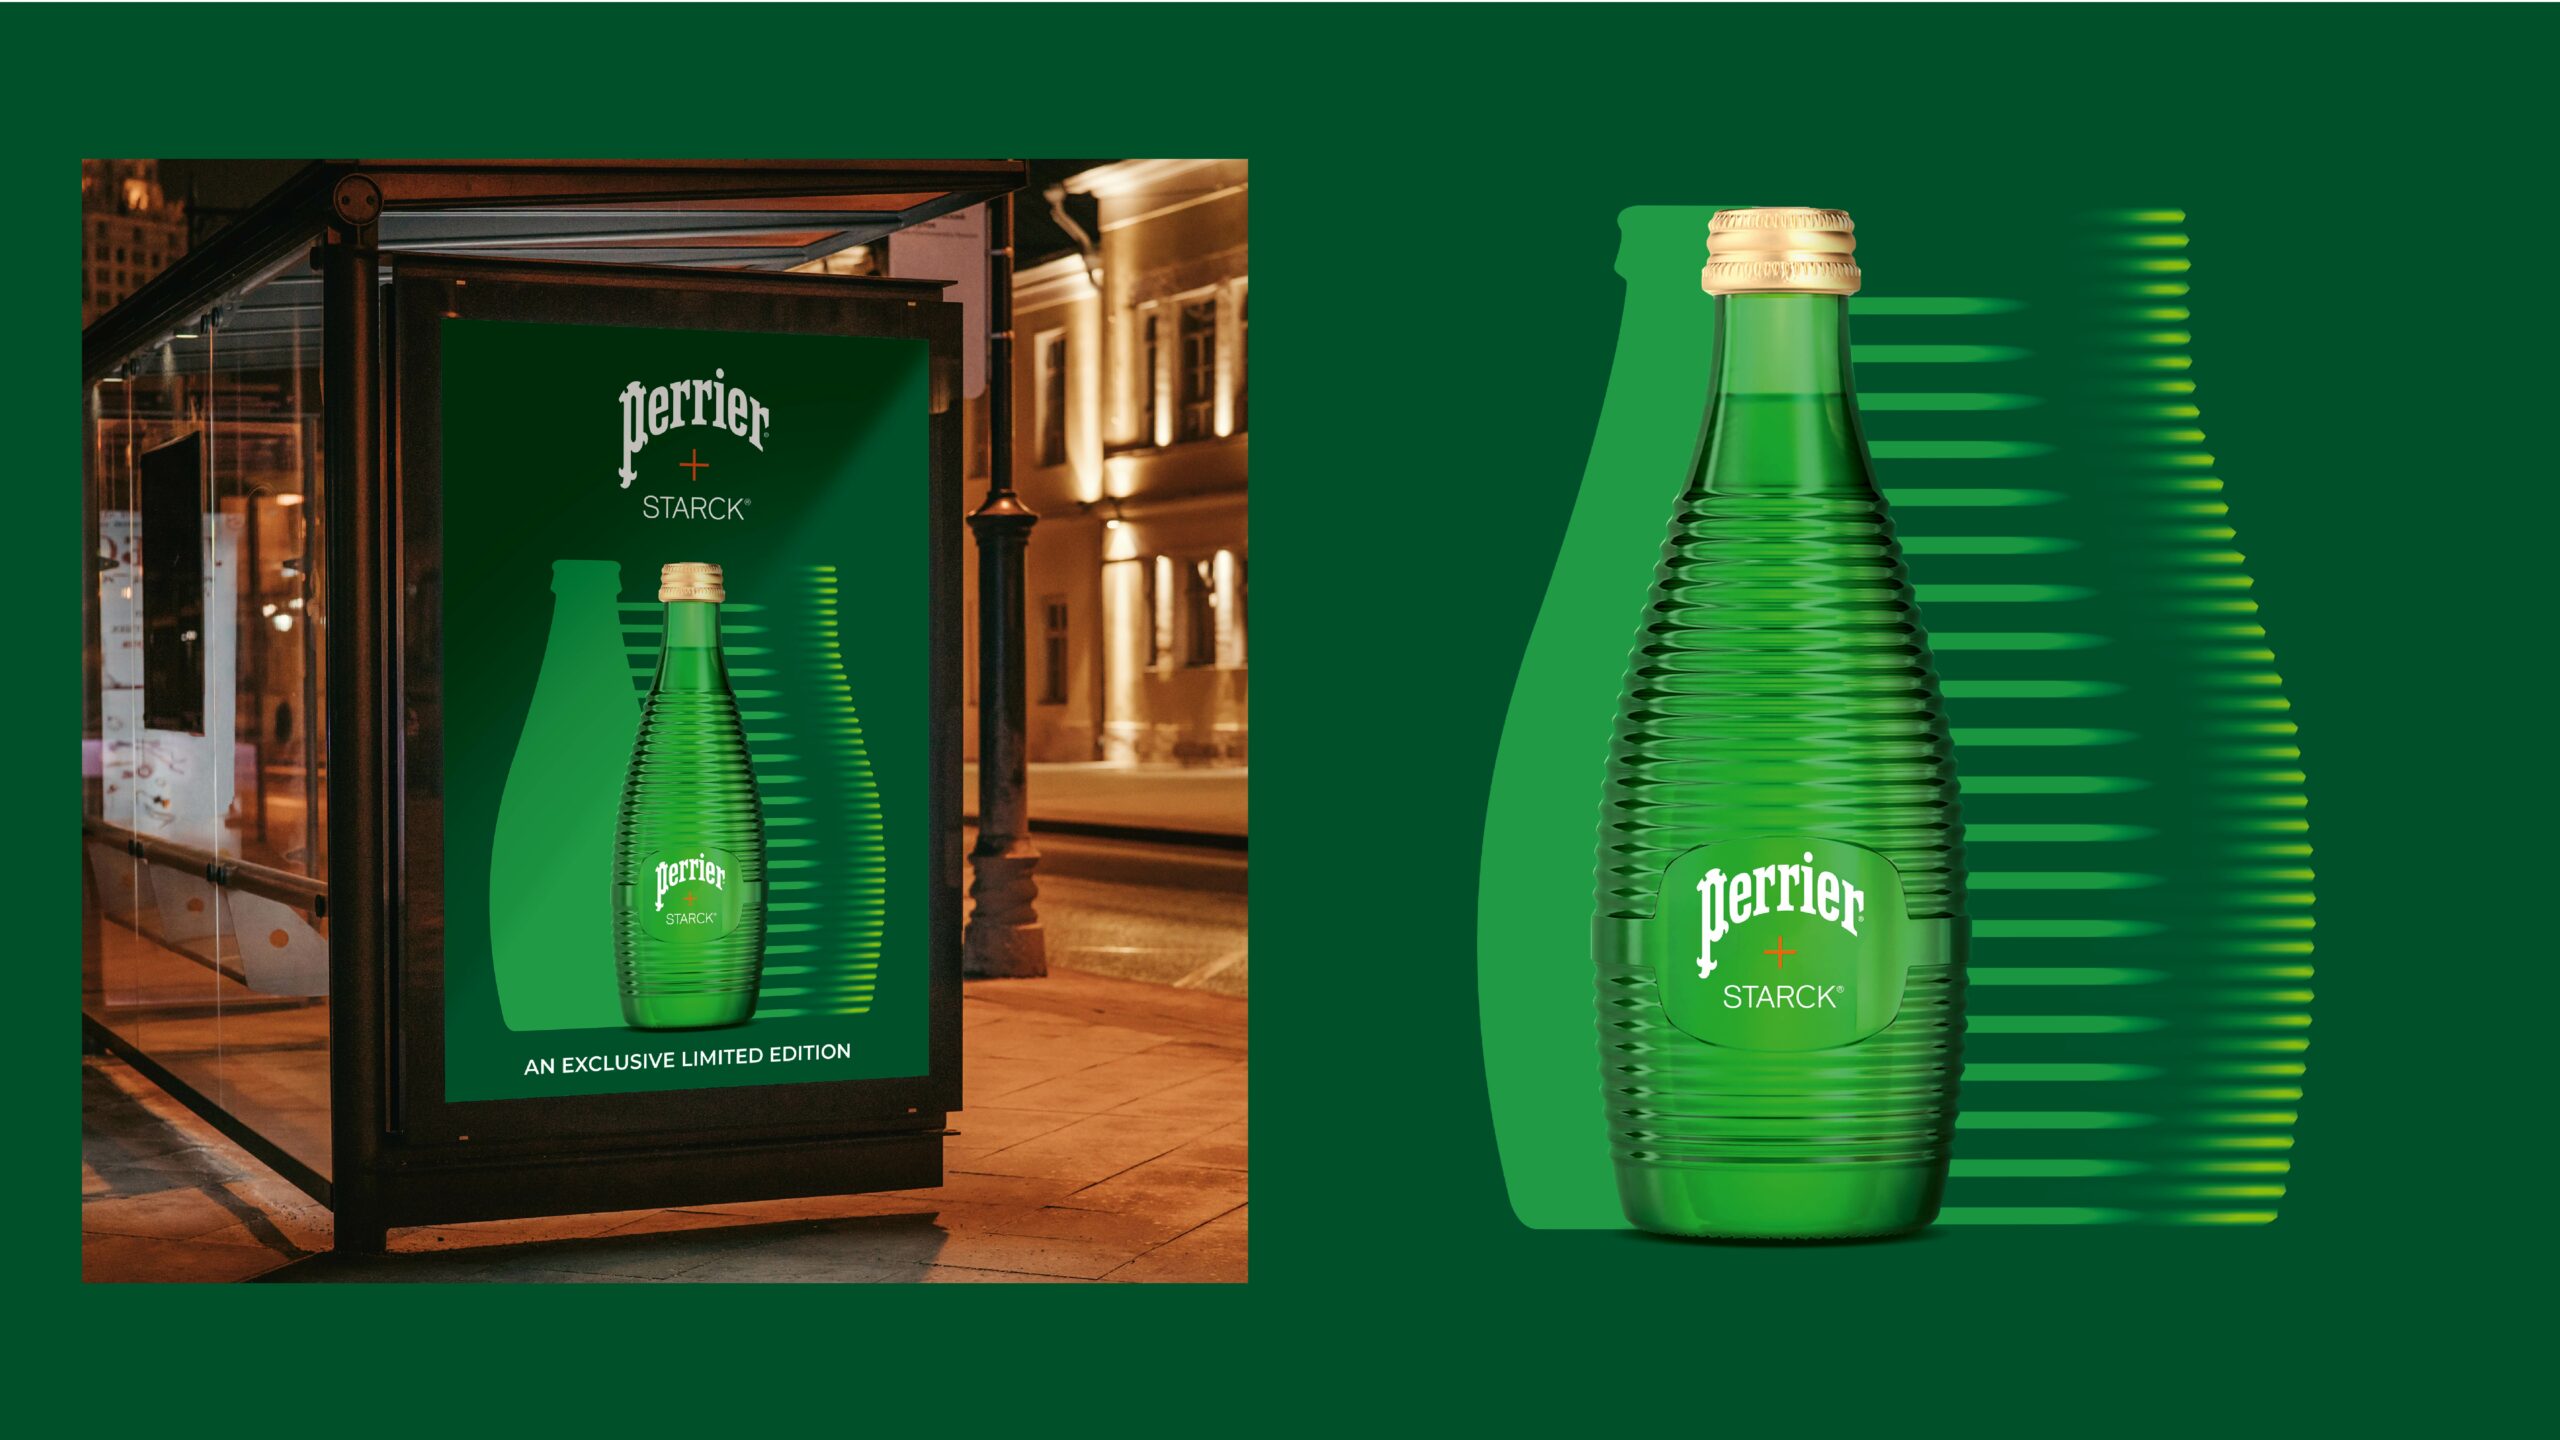 PERRIER STARCK CASE STUDY AnC 231121 PAGE 8 scaled